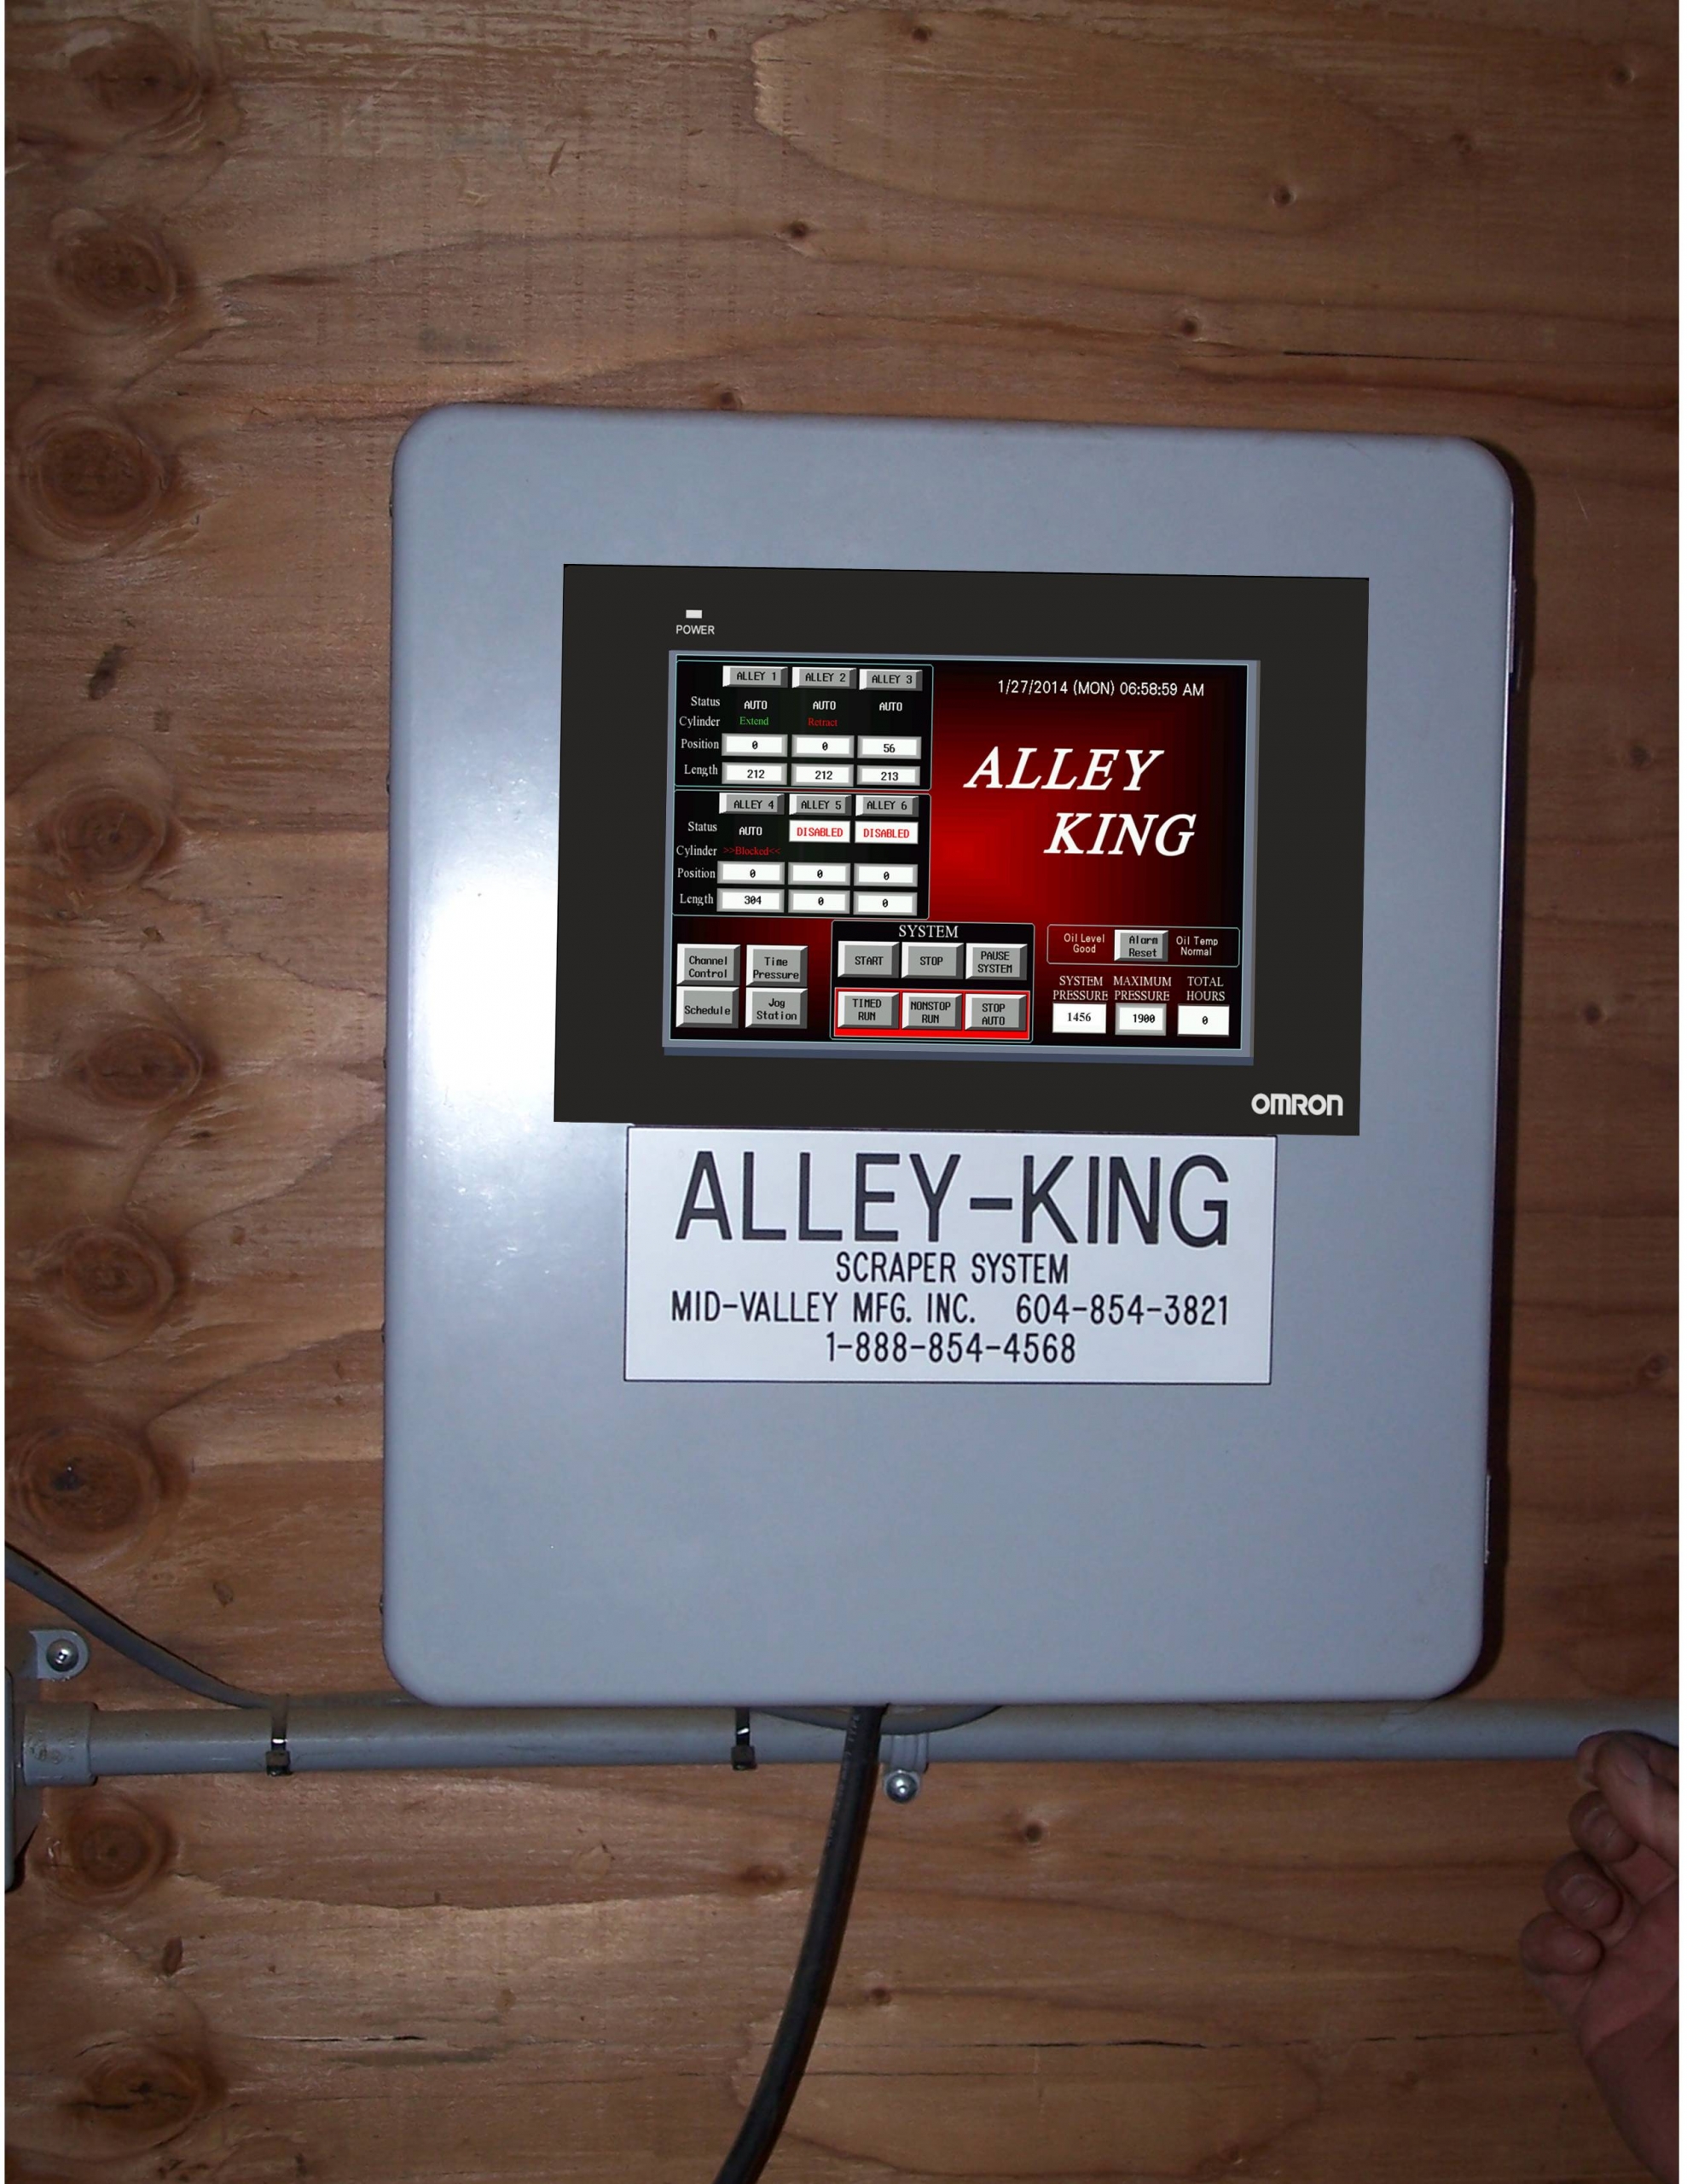 Control Panel for Alley King Manure Scraper System